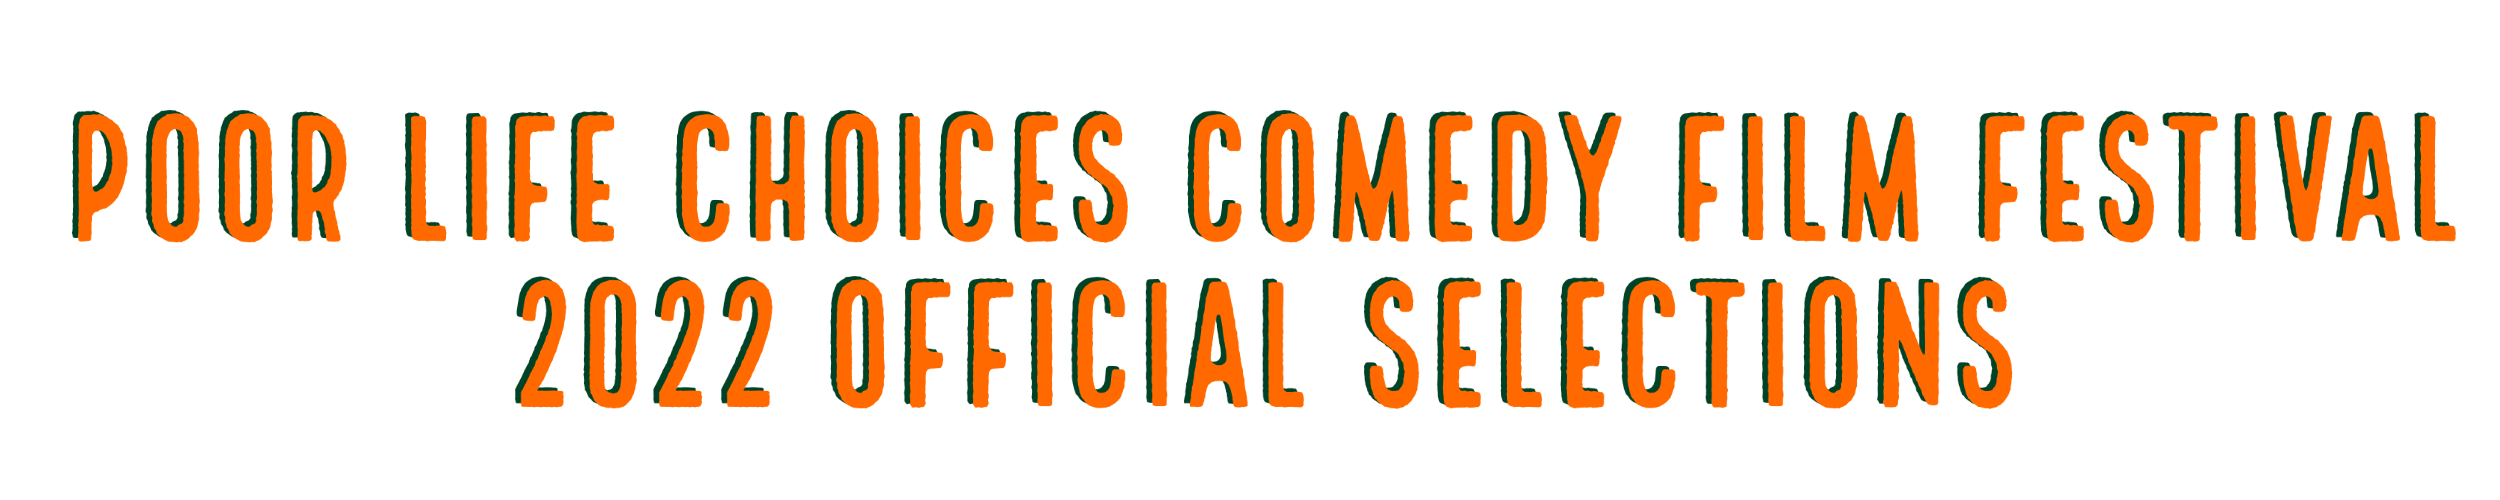 POOR LIFE CHOICES COMEDY FILM FESTIVAL 2022 OFFICIAL SELECTIONS